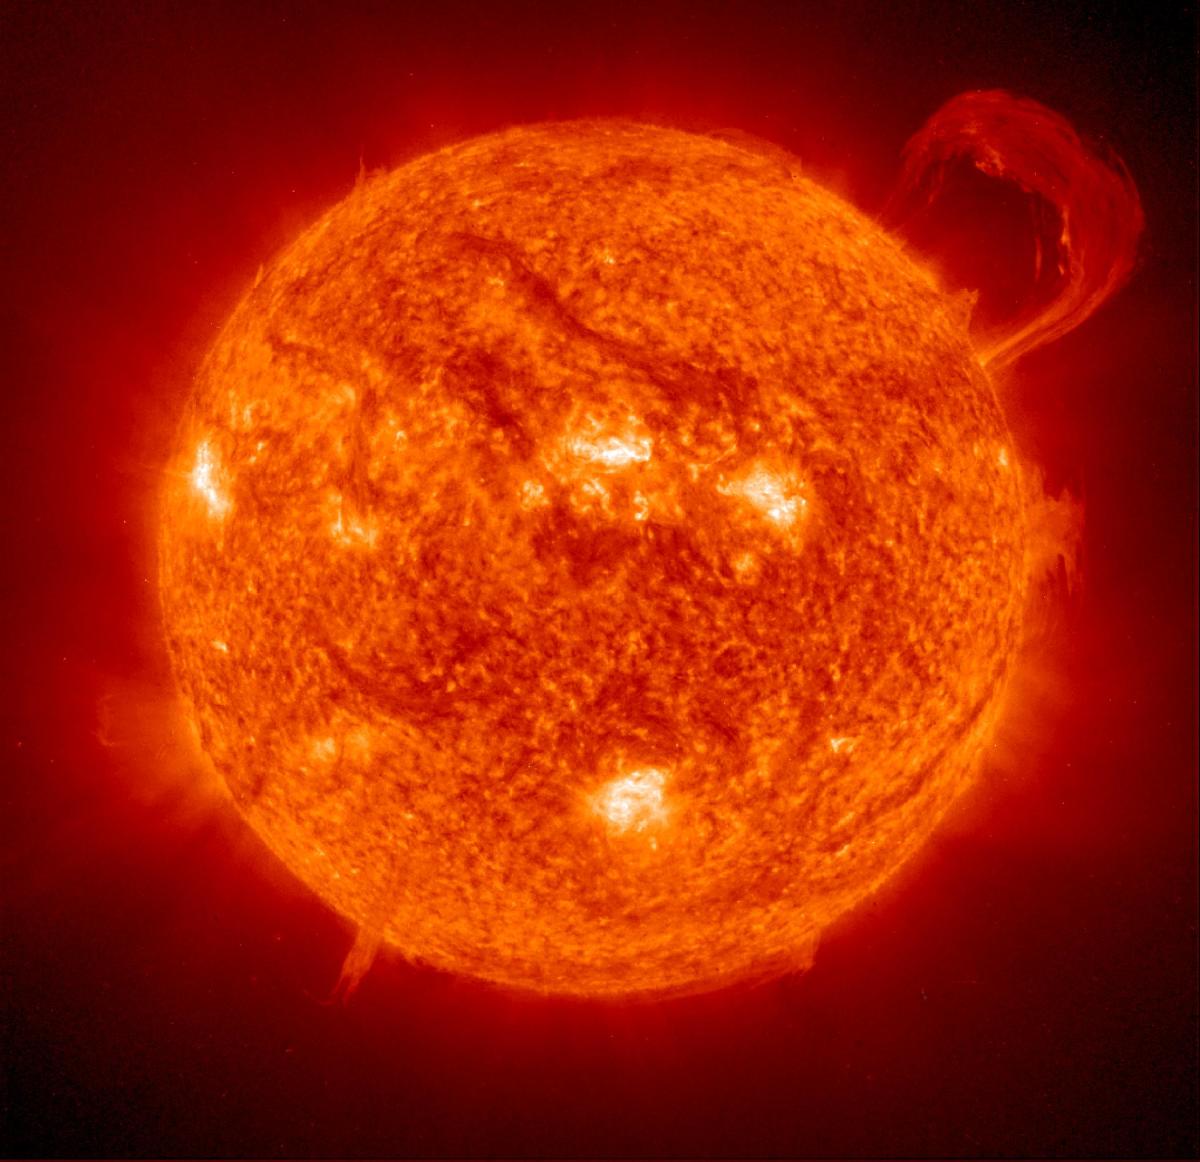 Another image of the Sun, with solar flares. This picture is imaged by SOHO - the Solar and Heliospheric Observatory